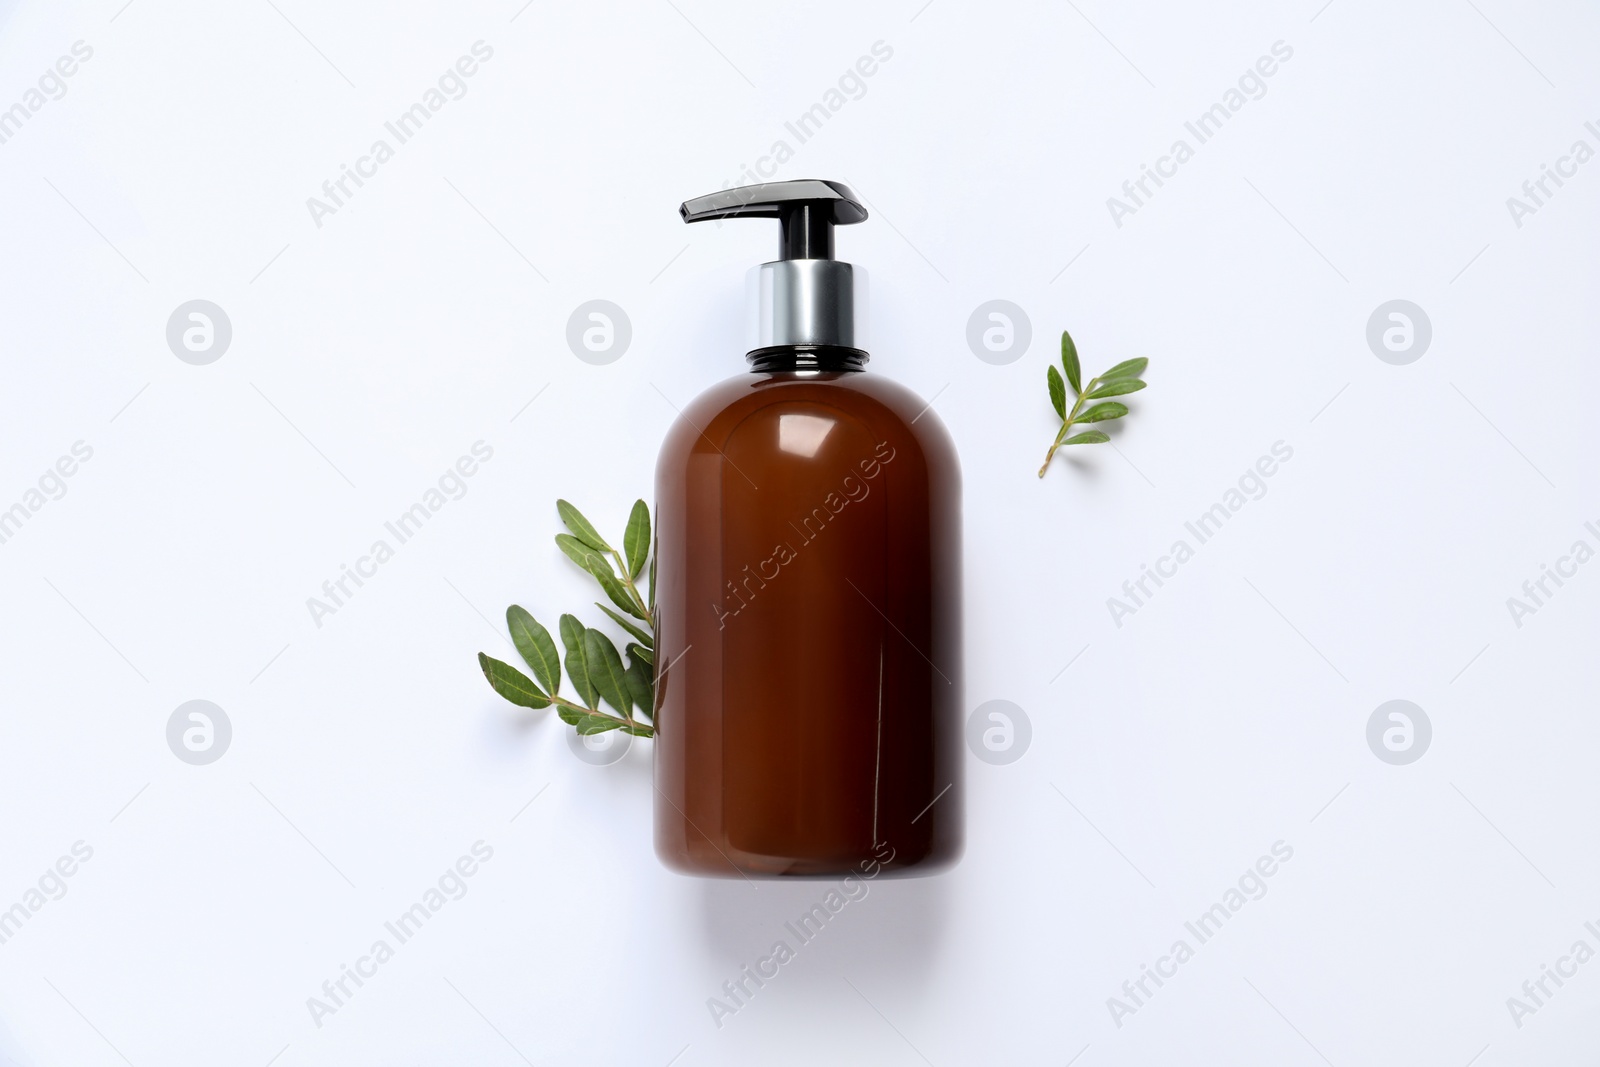 Photo of Bottle of cosmetic product and green leaves on white background, flat lay